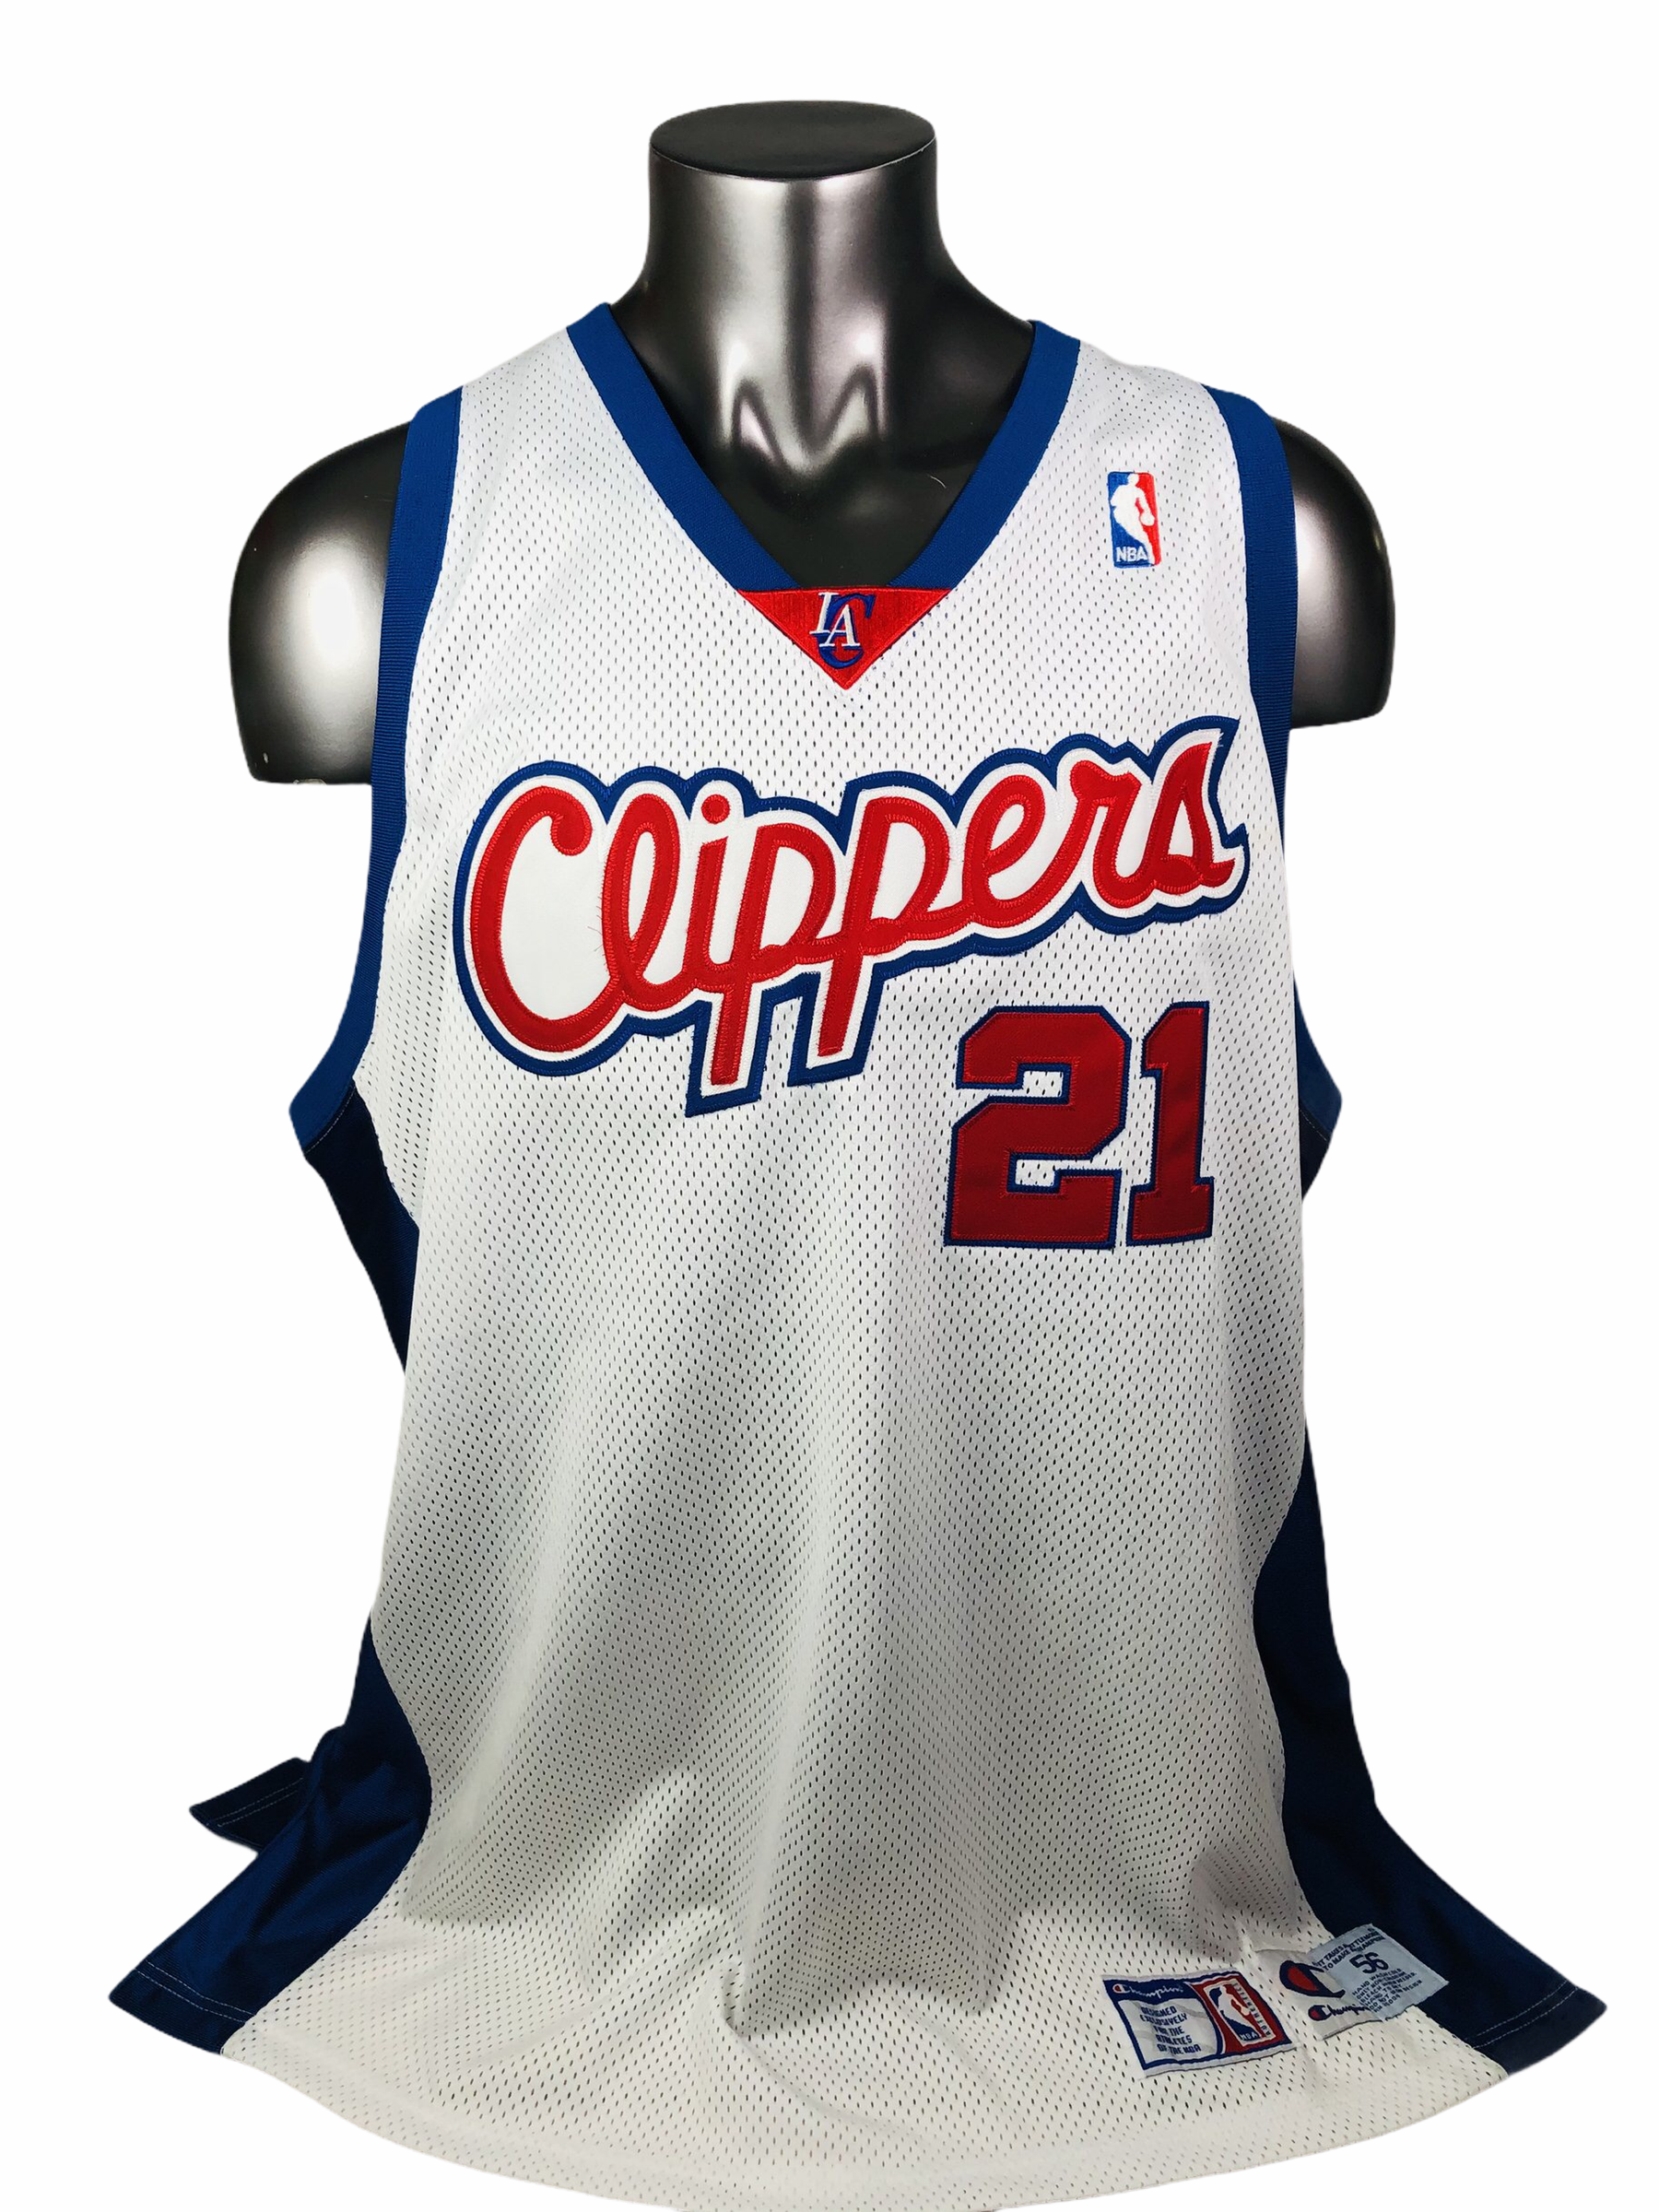 Los Angeles Clippers Nike Classic Edition Swingman Jersey - Ivica